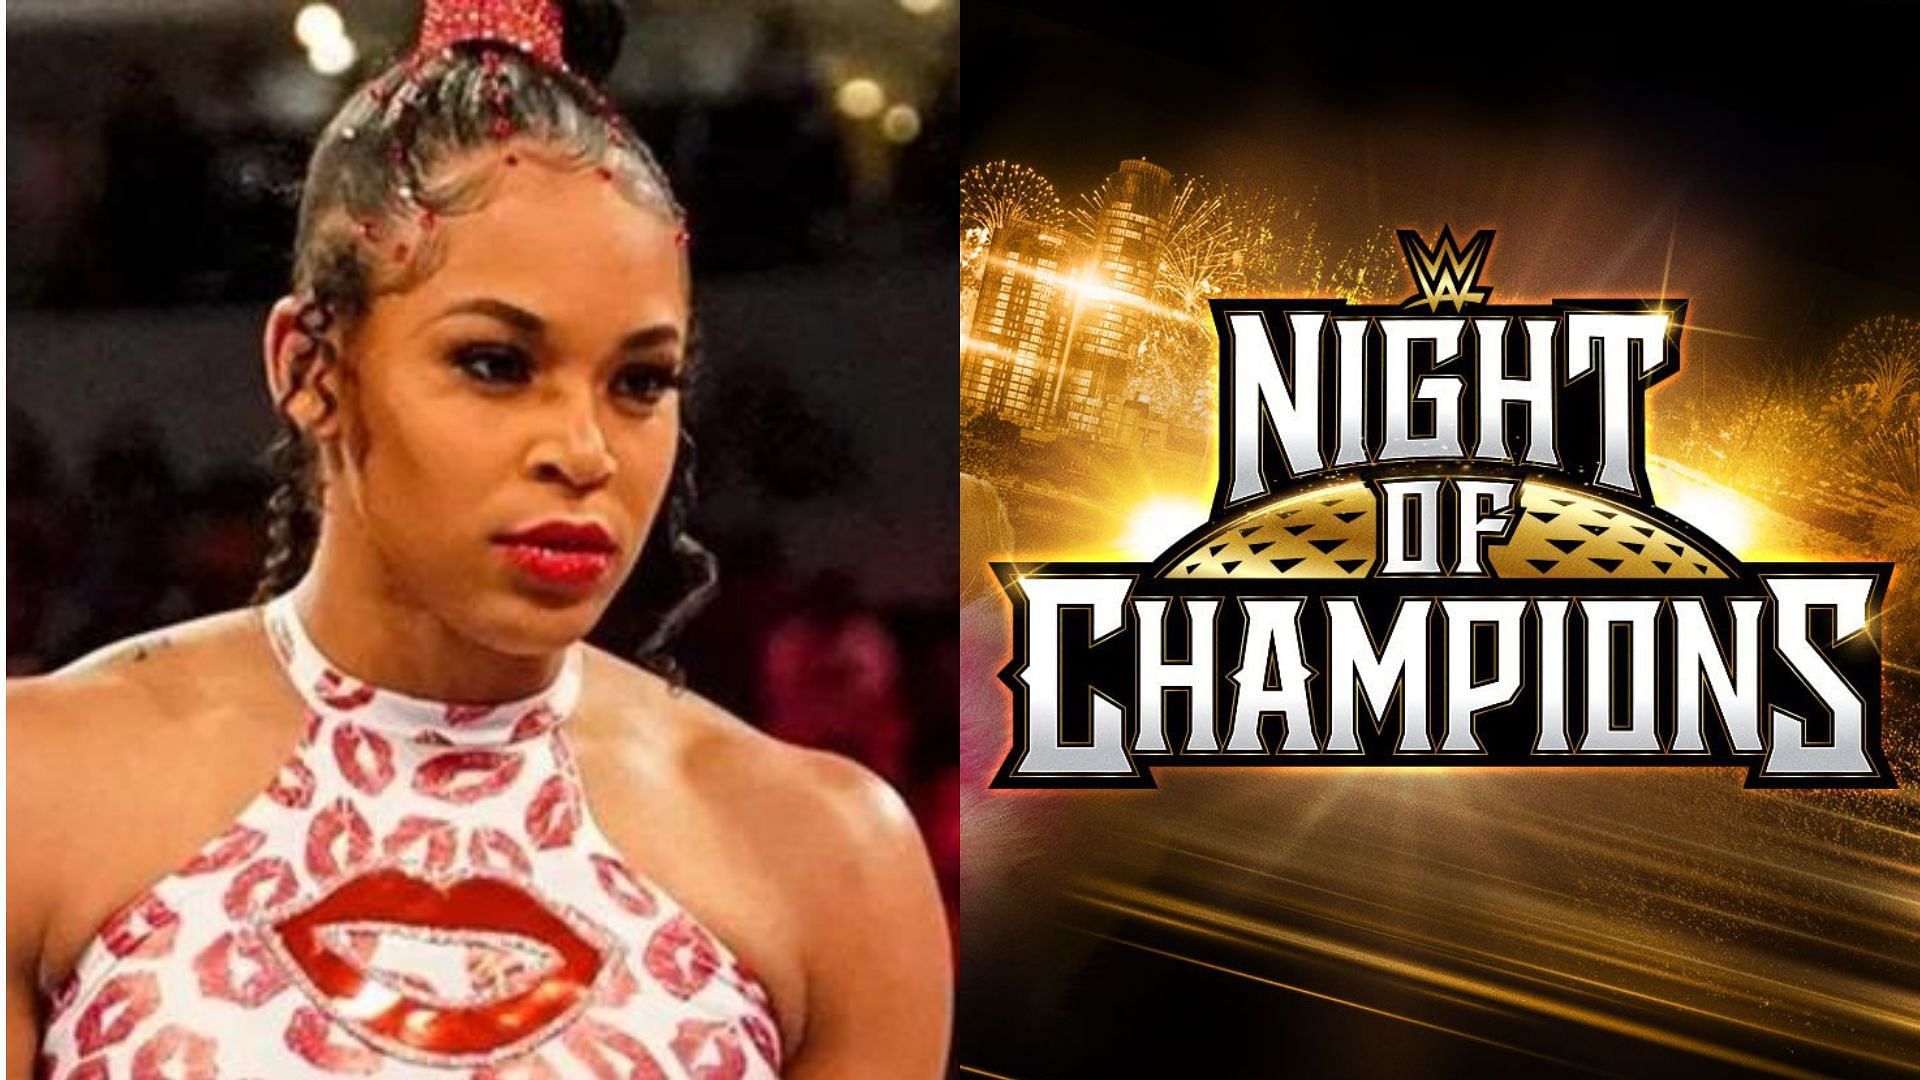 A former AEW star should confront Bianca Belair at Night of Champions